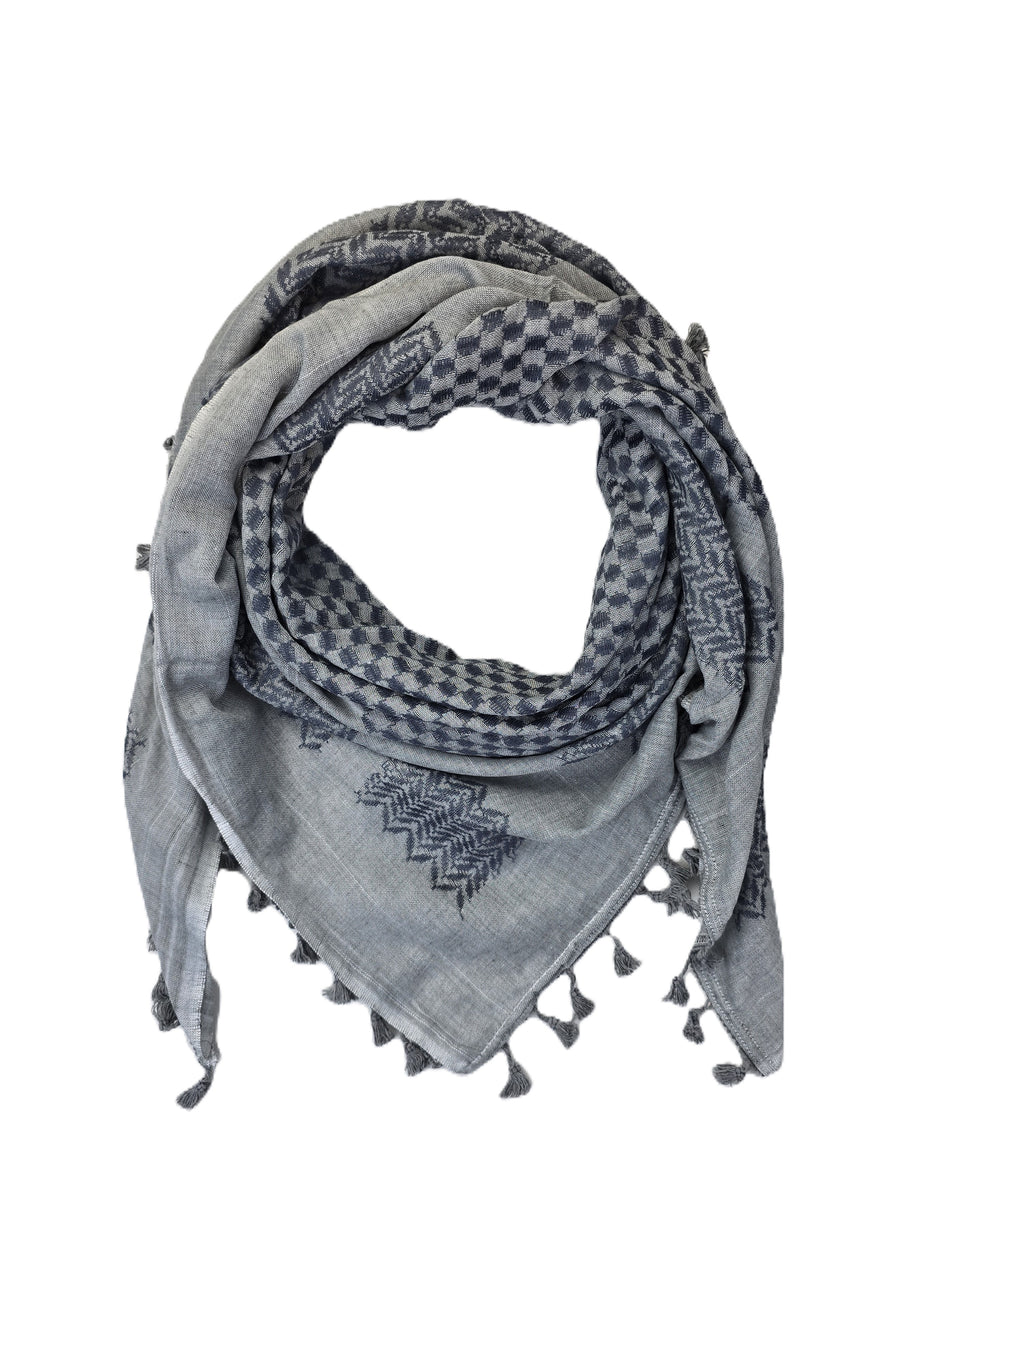 Keffiyeh Shemagh Scarf Made in Palestine - Gray and Black